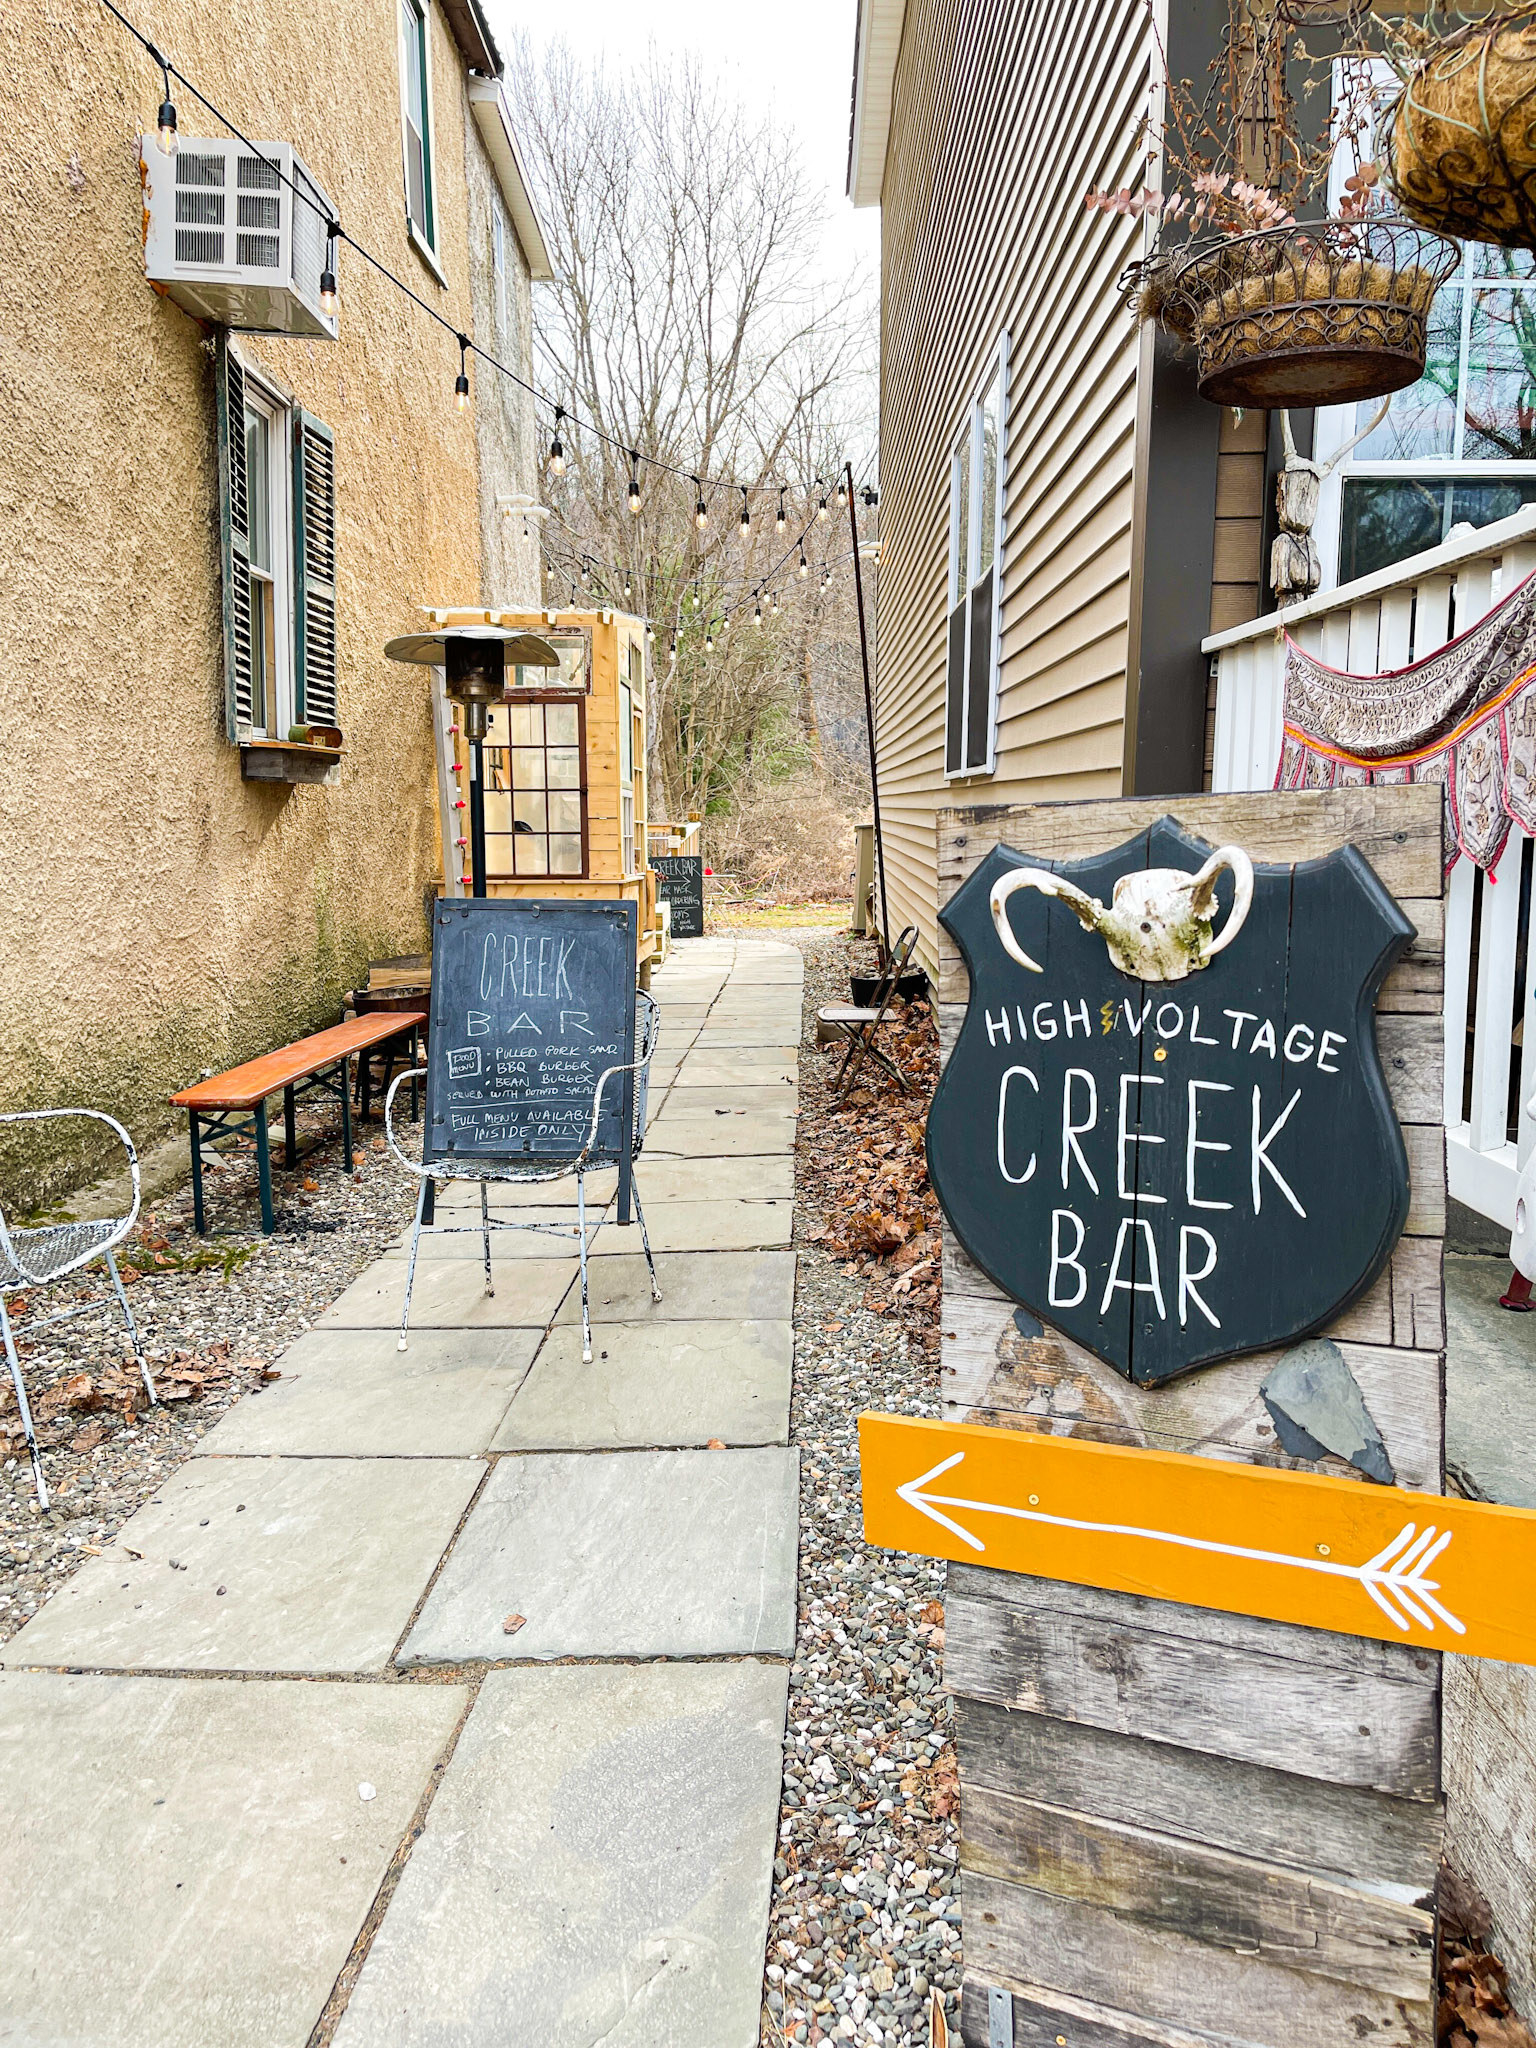 High Voltage Creek Bar exterior with an arrow pointing to the side/rear of the restaurant